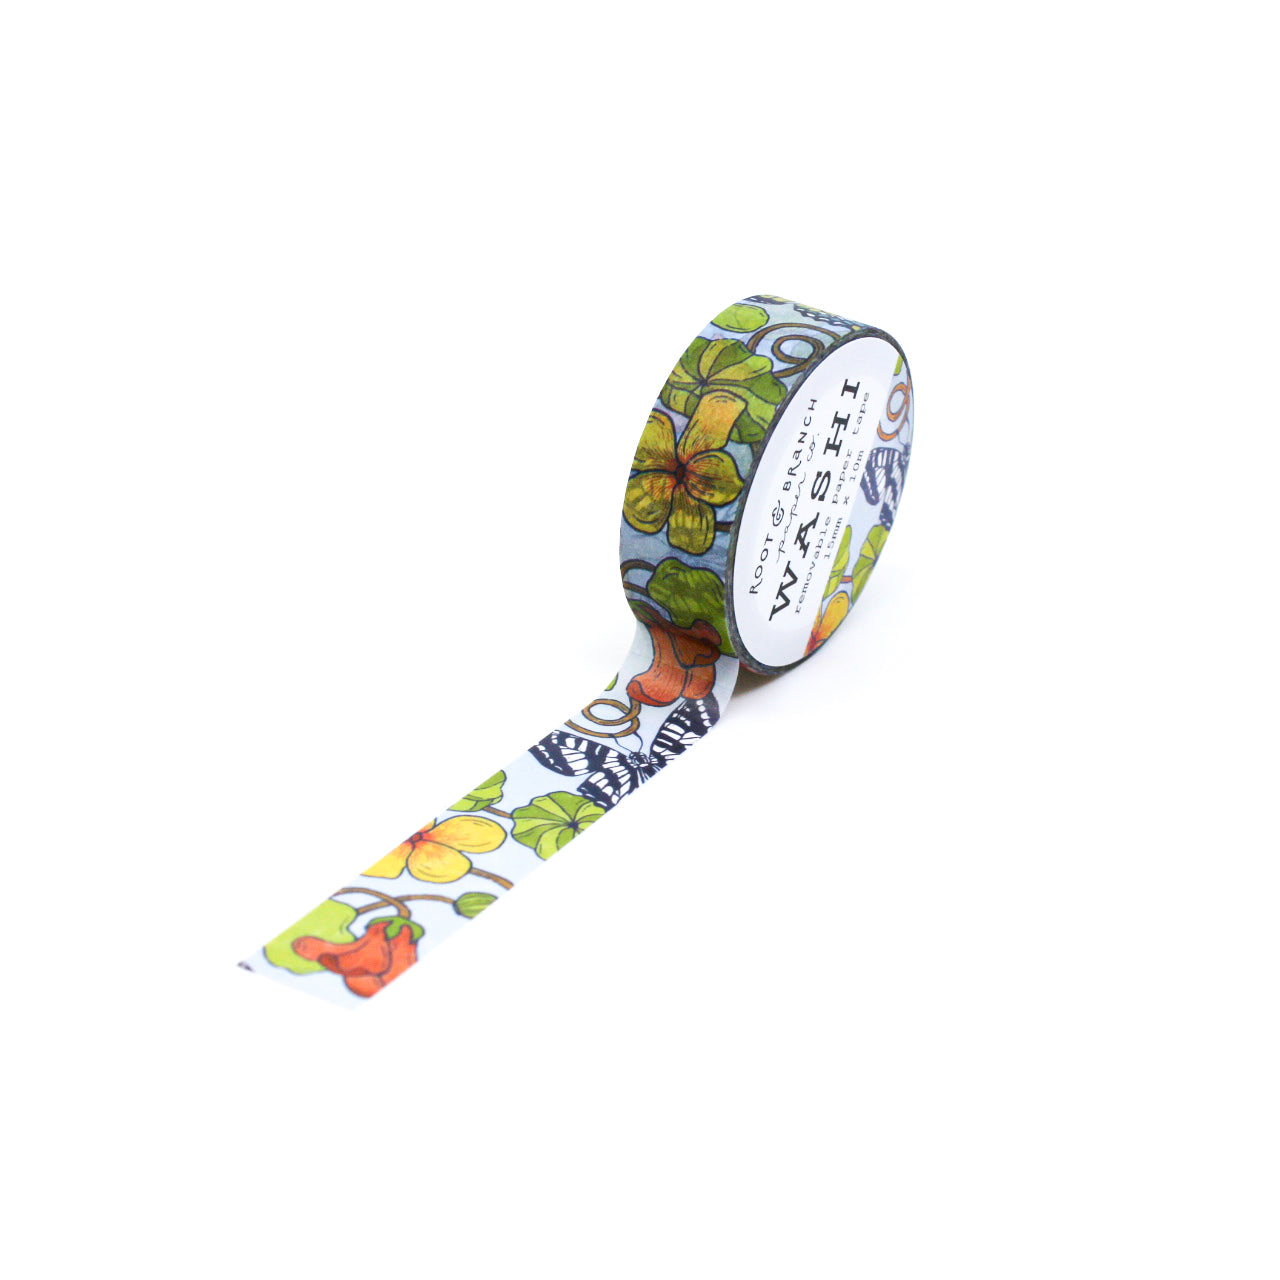 Nasturtium Garden and Swallowtail Butterfly Washi Tape, showcasing vibrant nasturtium blooms amidst graceful swallowtail butterflies in a stunning design. This tape from Root & Branch Paper co. is sold at BBB Supplies Craft Shop.